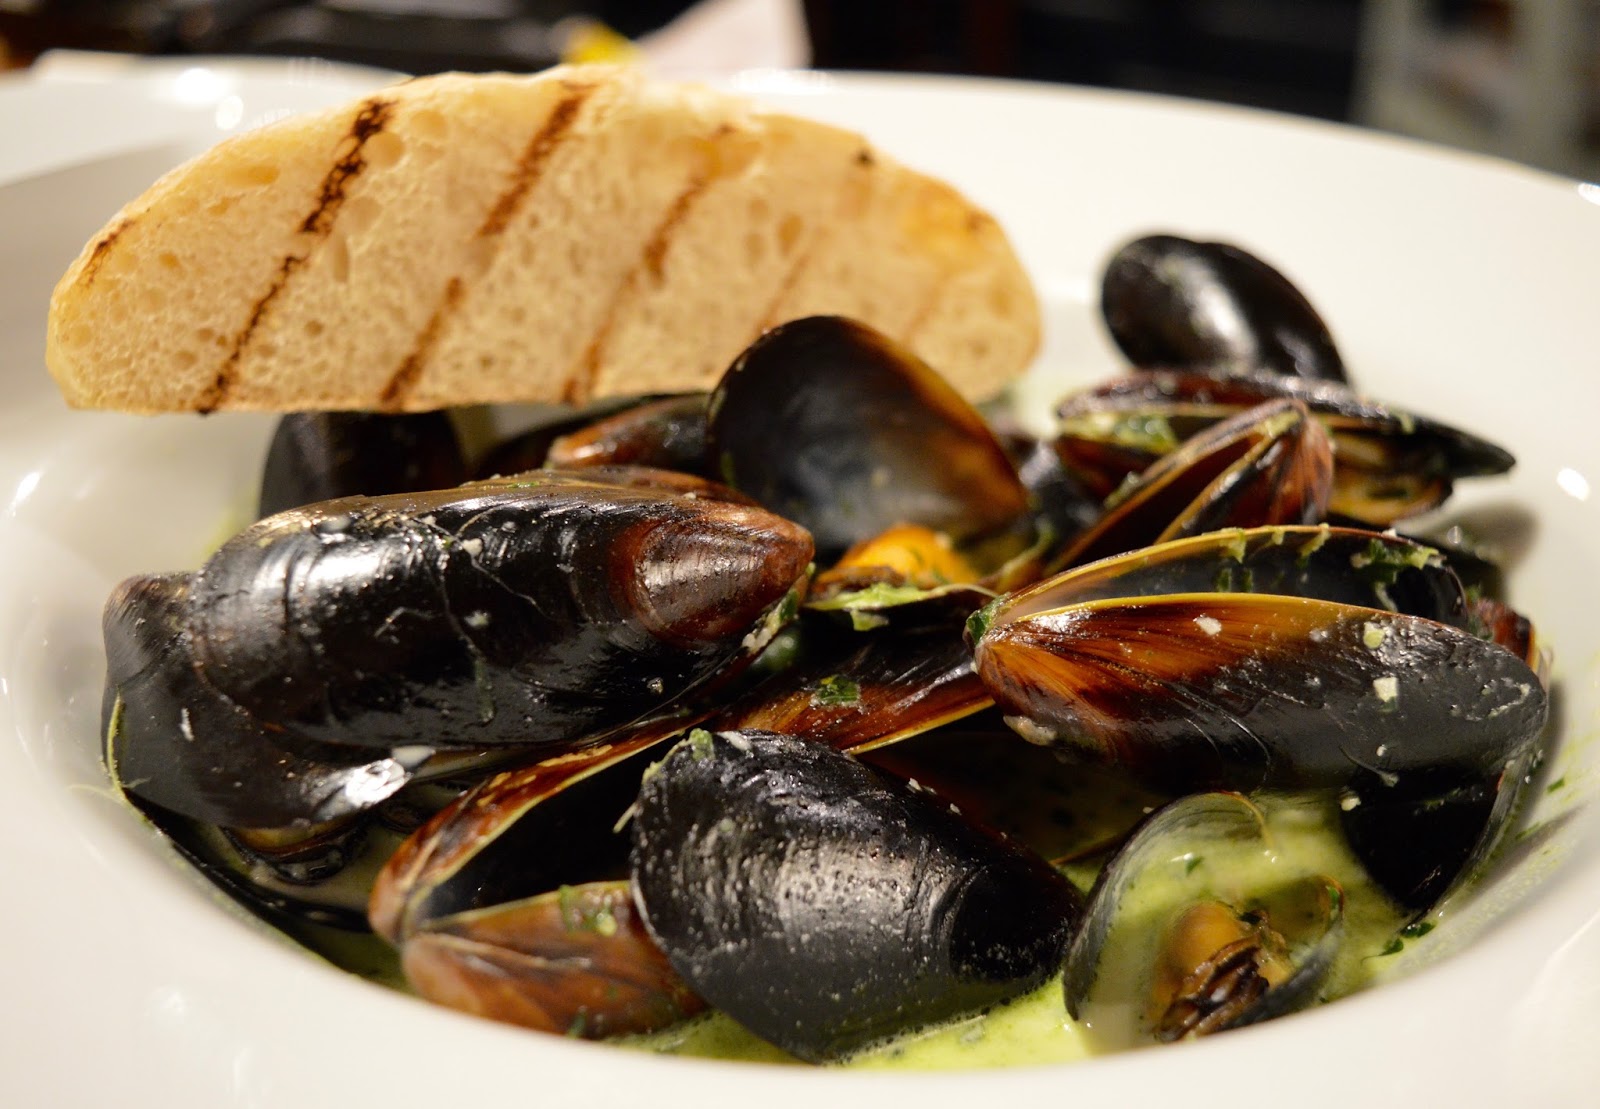 The Kingslodge Inn, Durham | A Review - A lovely budget hotel near the train station and city centre - mussels in white wine sauce